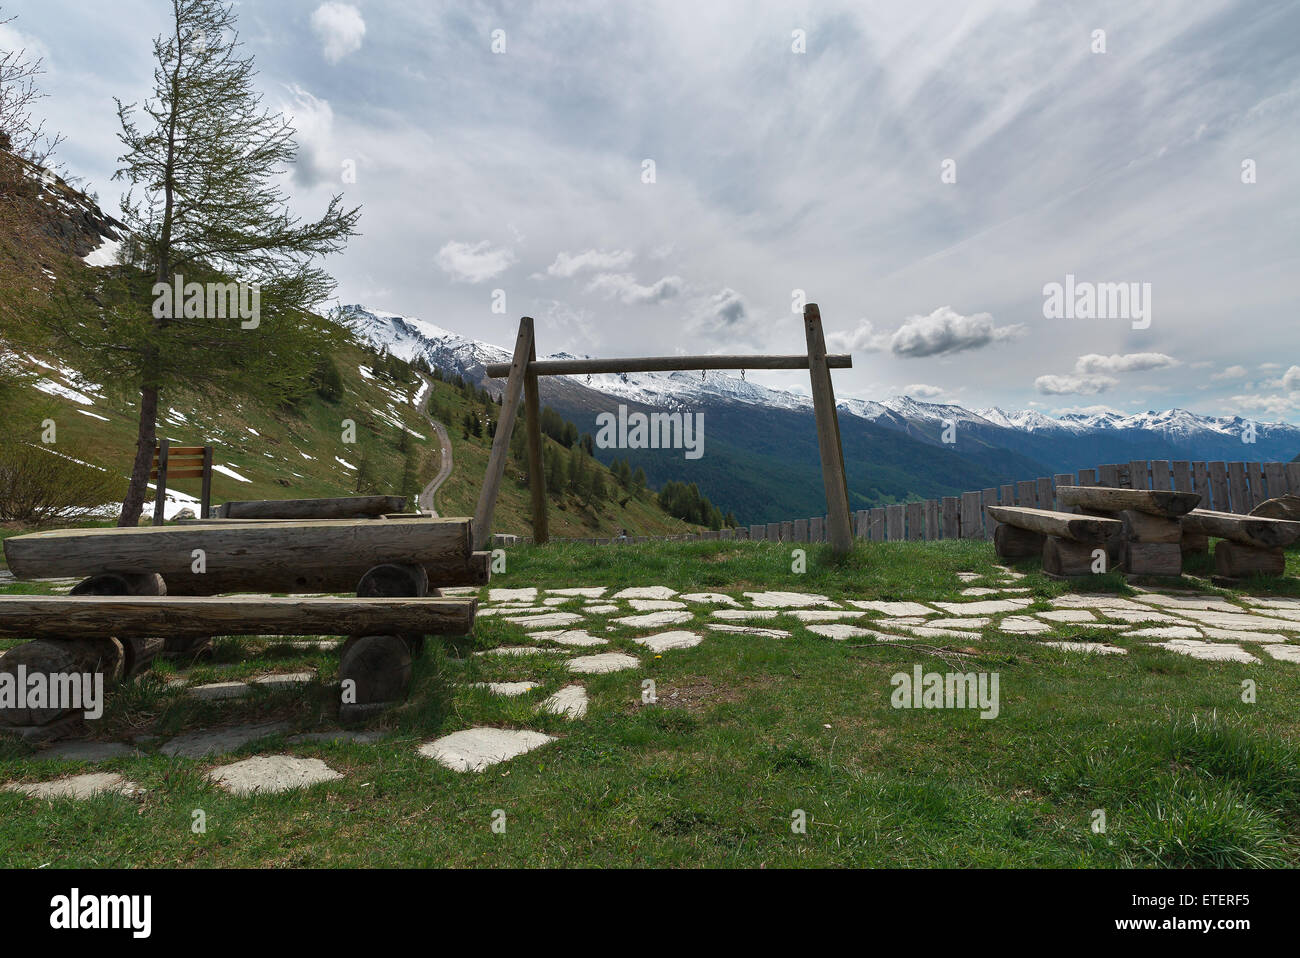 tables and benches for outdoor recreation Stock Photo